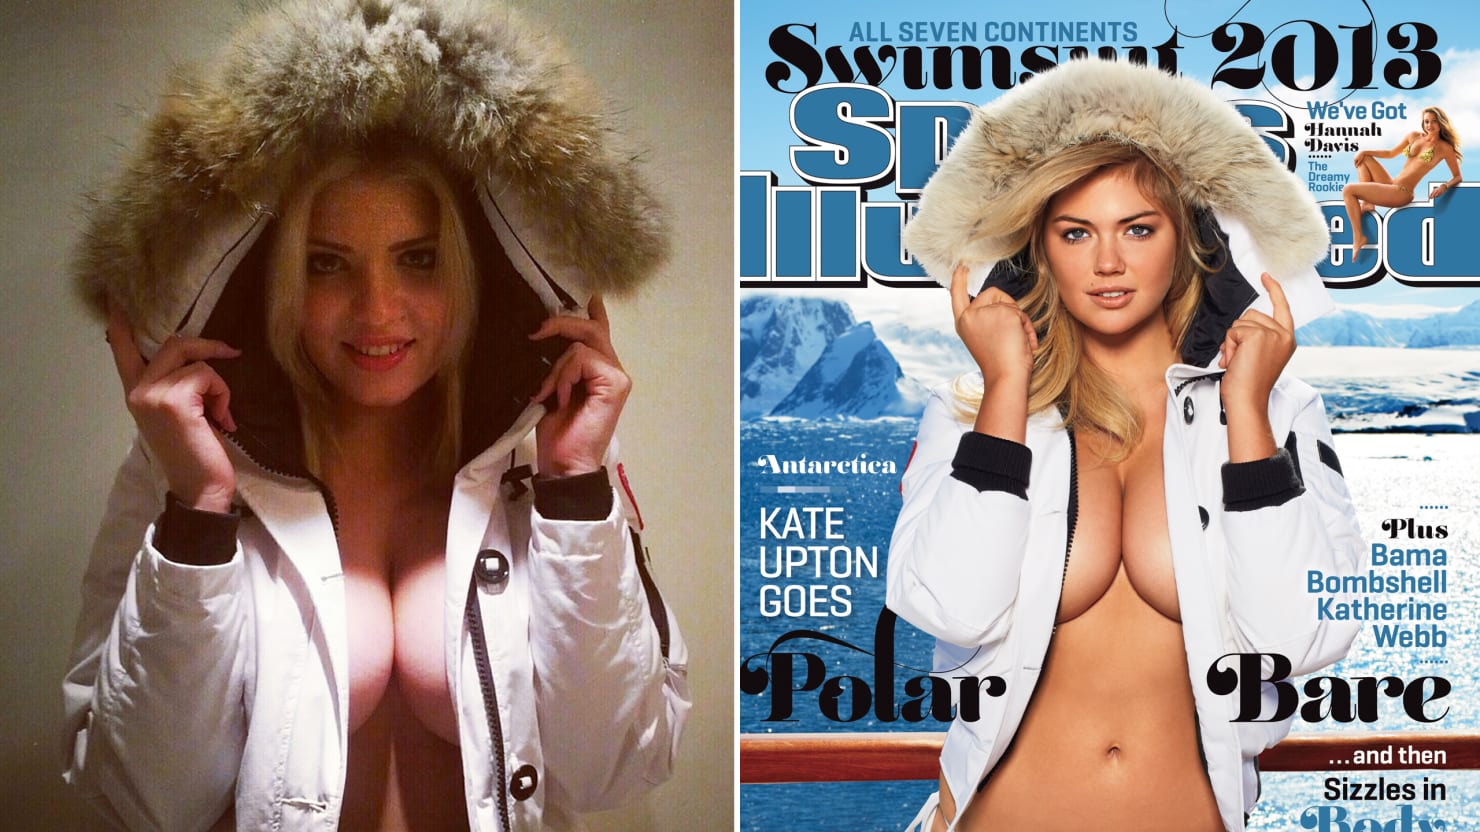 Jean Trinh on Kate Upton’s lookalike, a Russian student who talks about her...